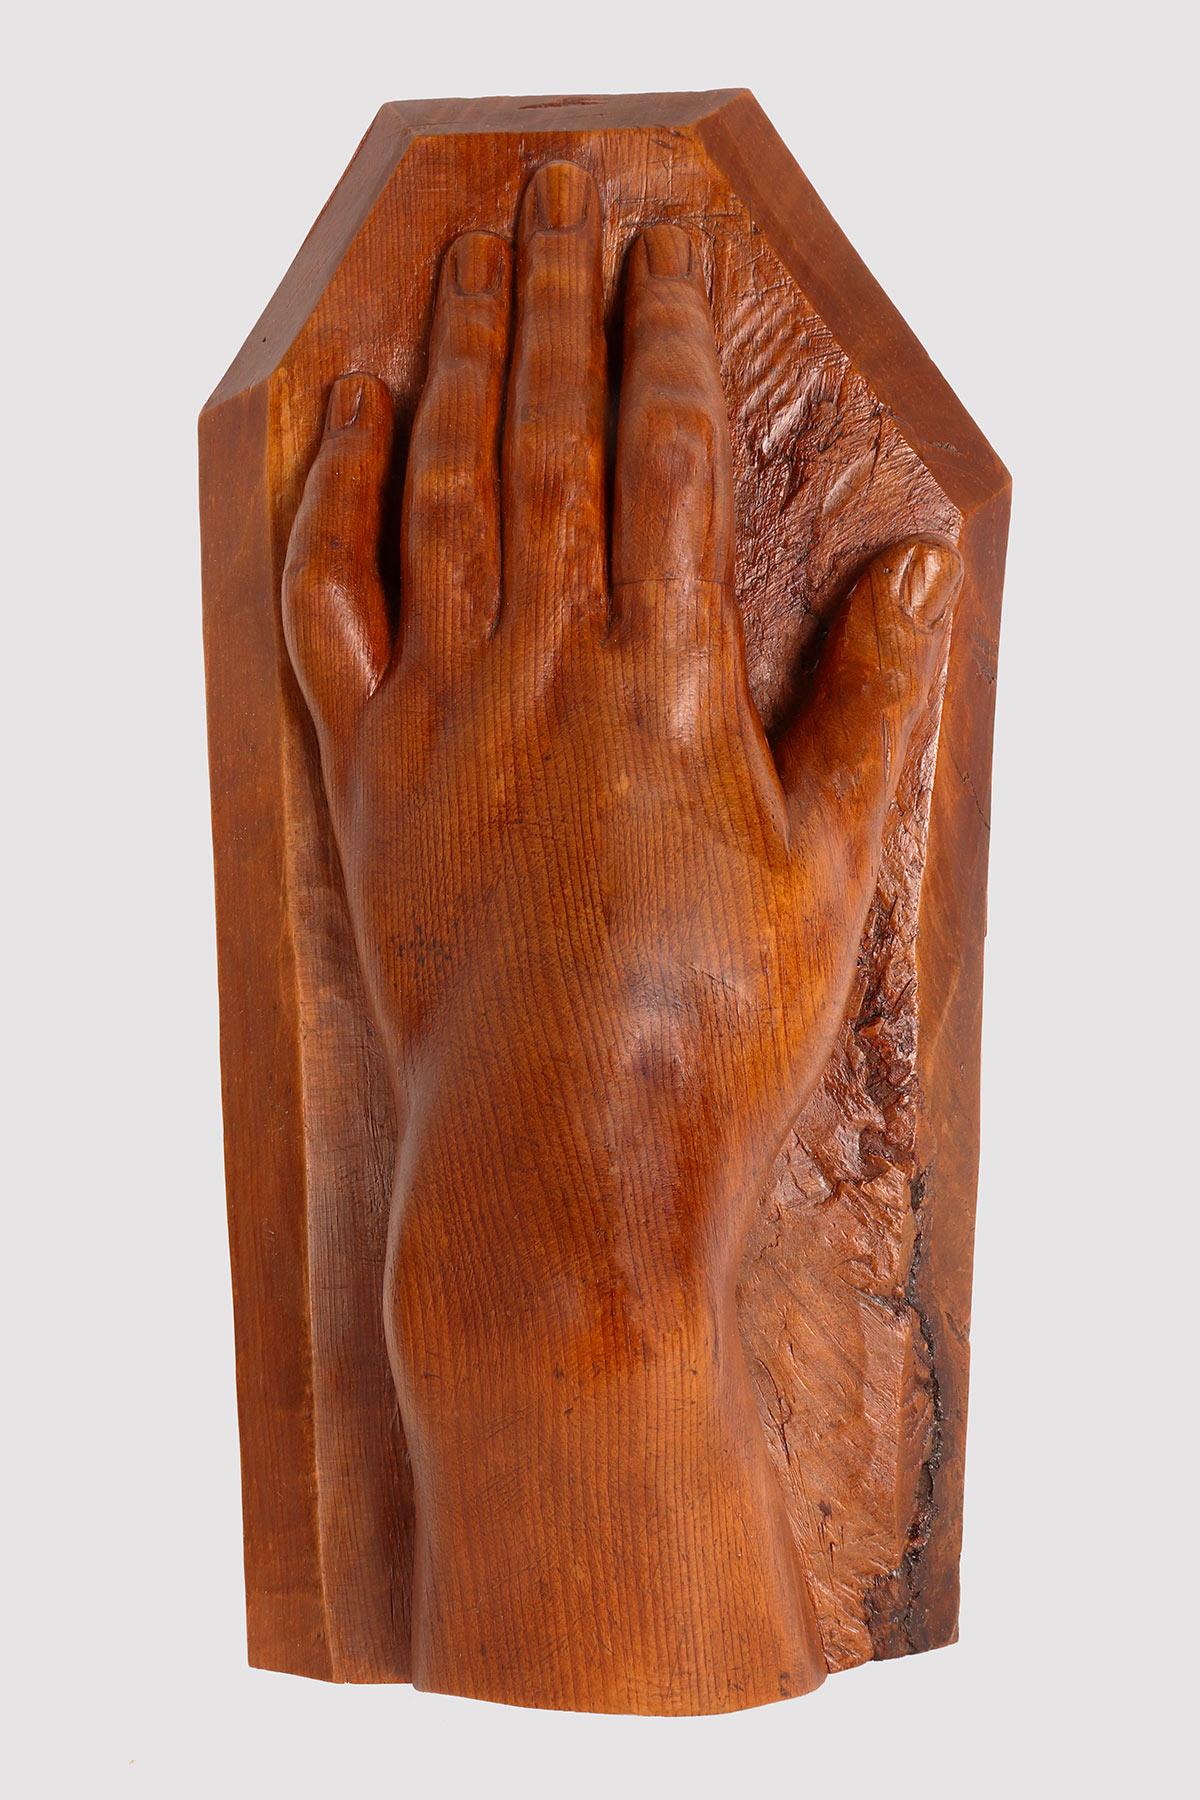 Artistic atelier sculpture depicting a female hand. Made of fruit wood, the sculpture has a smooth base with an irregular geometric edge, on which is the artist's proof of refined workmanship and realism, finished down to the smallest detail. Not